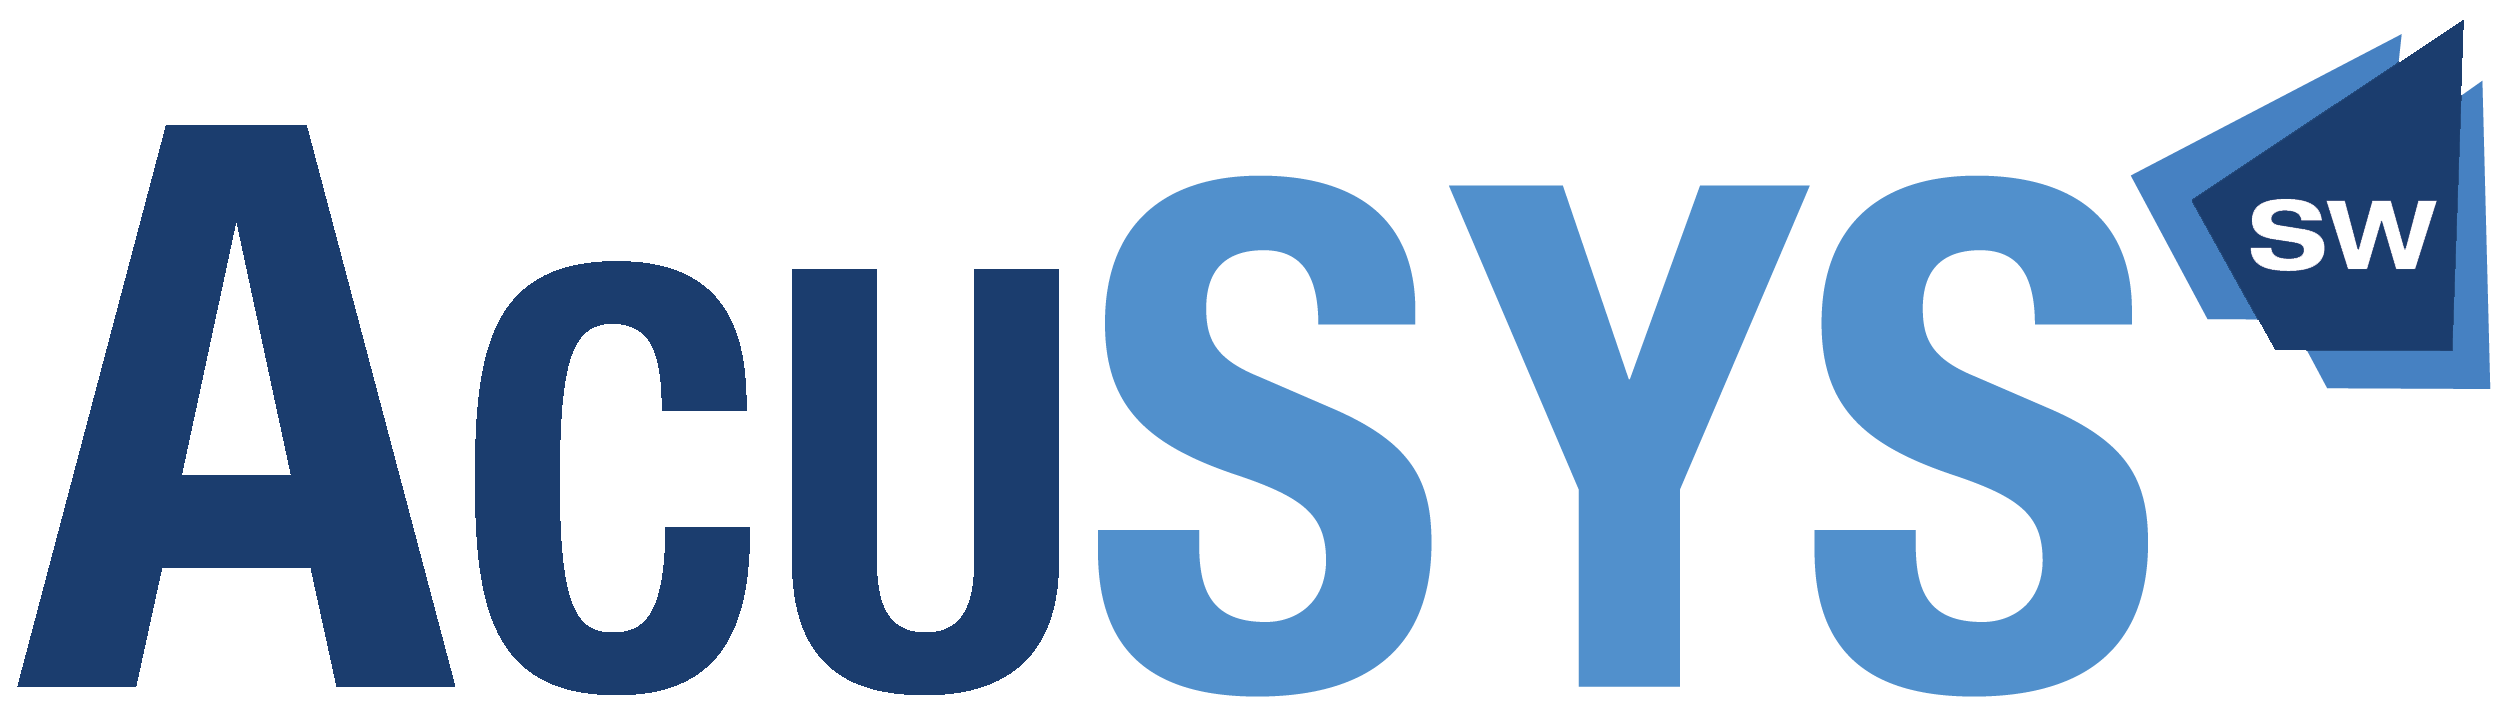 AcuSYS Software Solutions (Pty) Ltd.